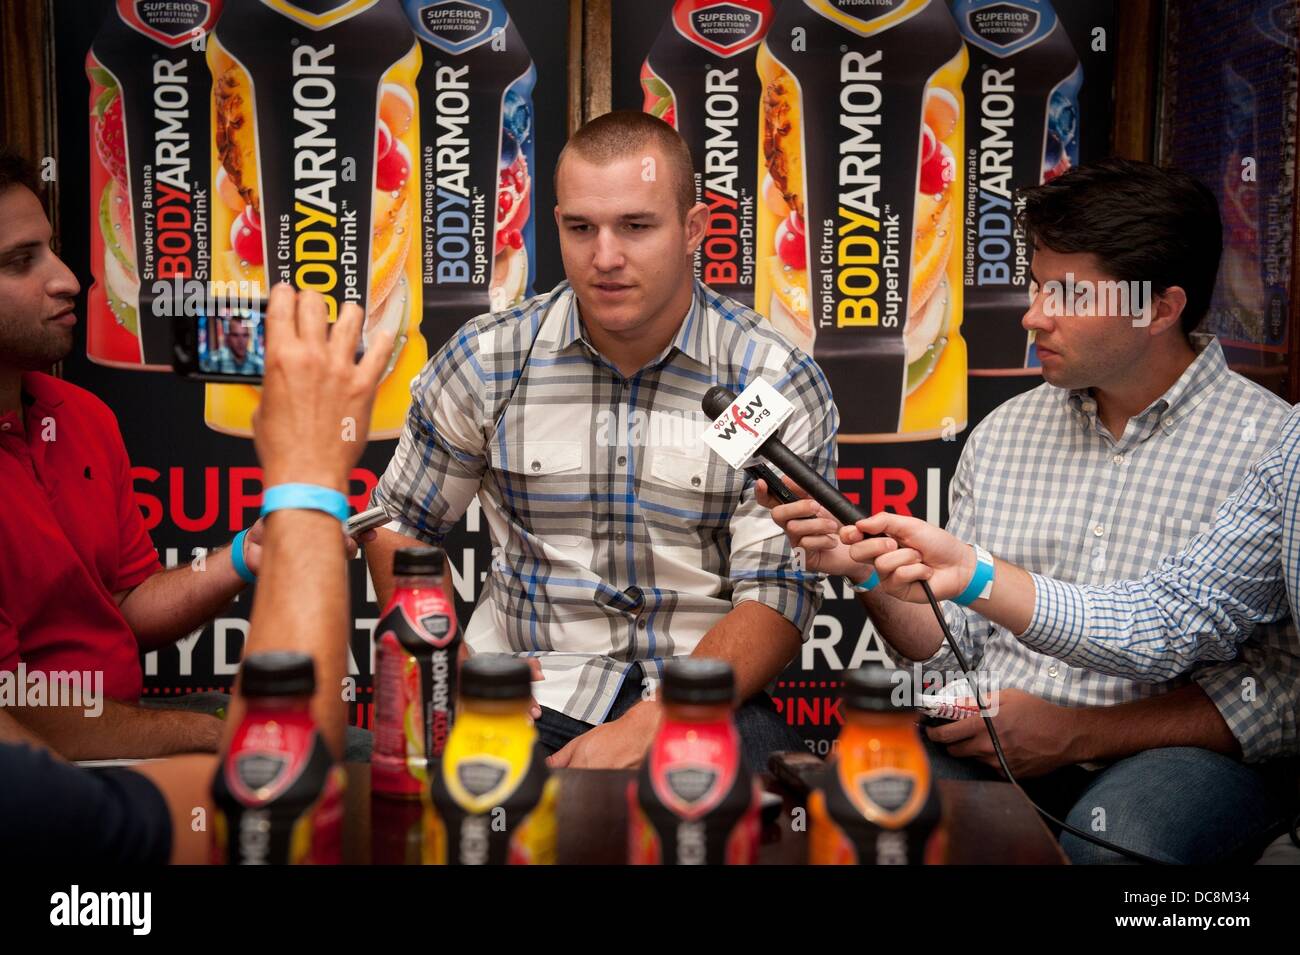 Manhattan, New York, USA. 12th Aug, 2013. Los Angeles Angels of Anaheim outfielder MIKE TROUT speaks with the media at Foley's NY Pub & Restaurant on 33rd Street, Monday, August 12, 2013. Credit:  Bryan Smith/ZUMAPRESS.com/Alamy Live News Stock Photo